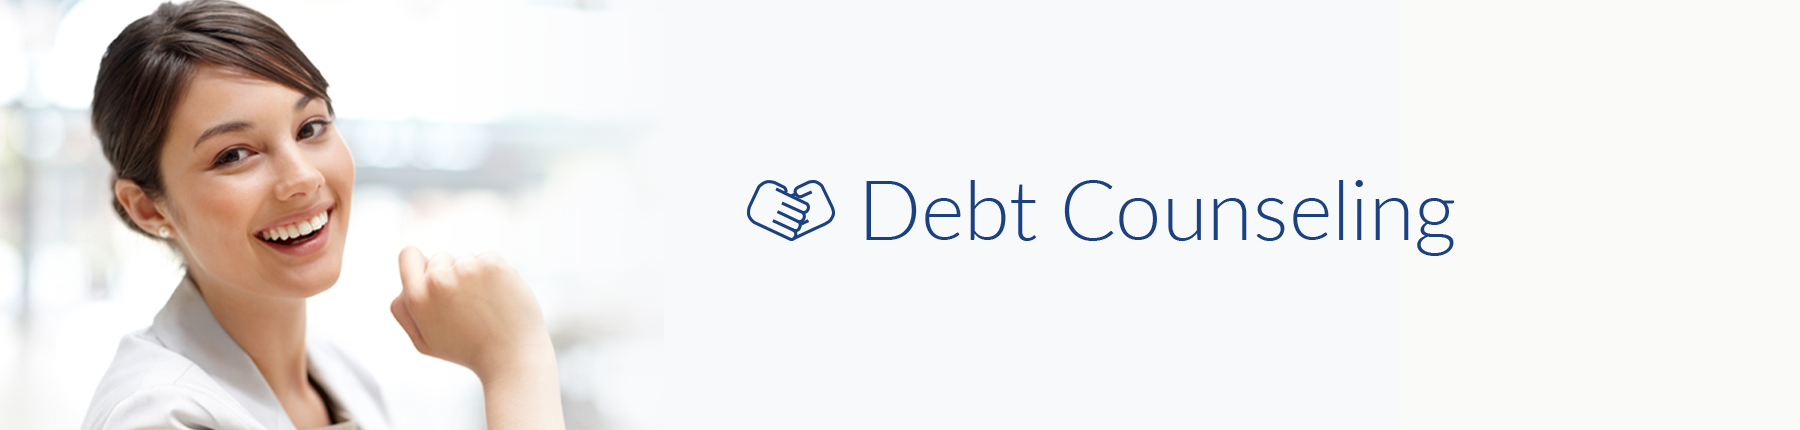 Debt Counseling Banner